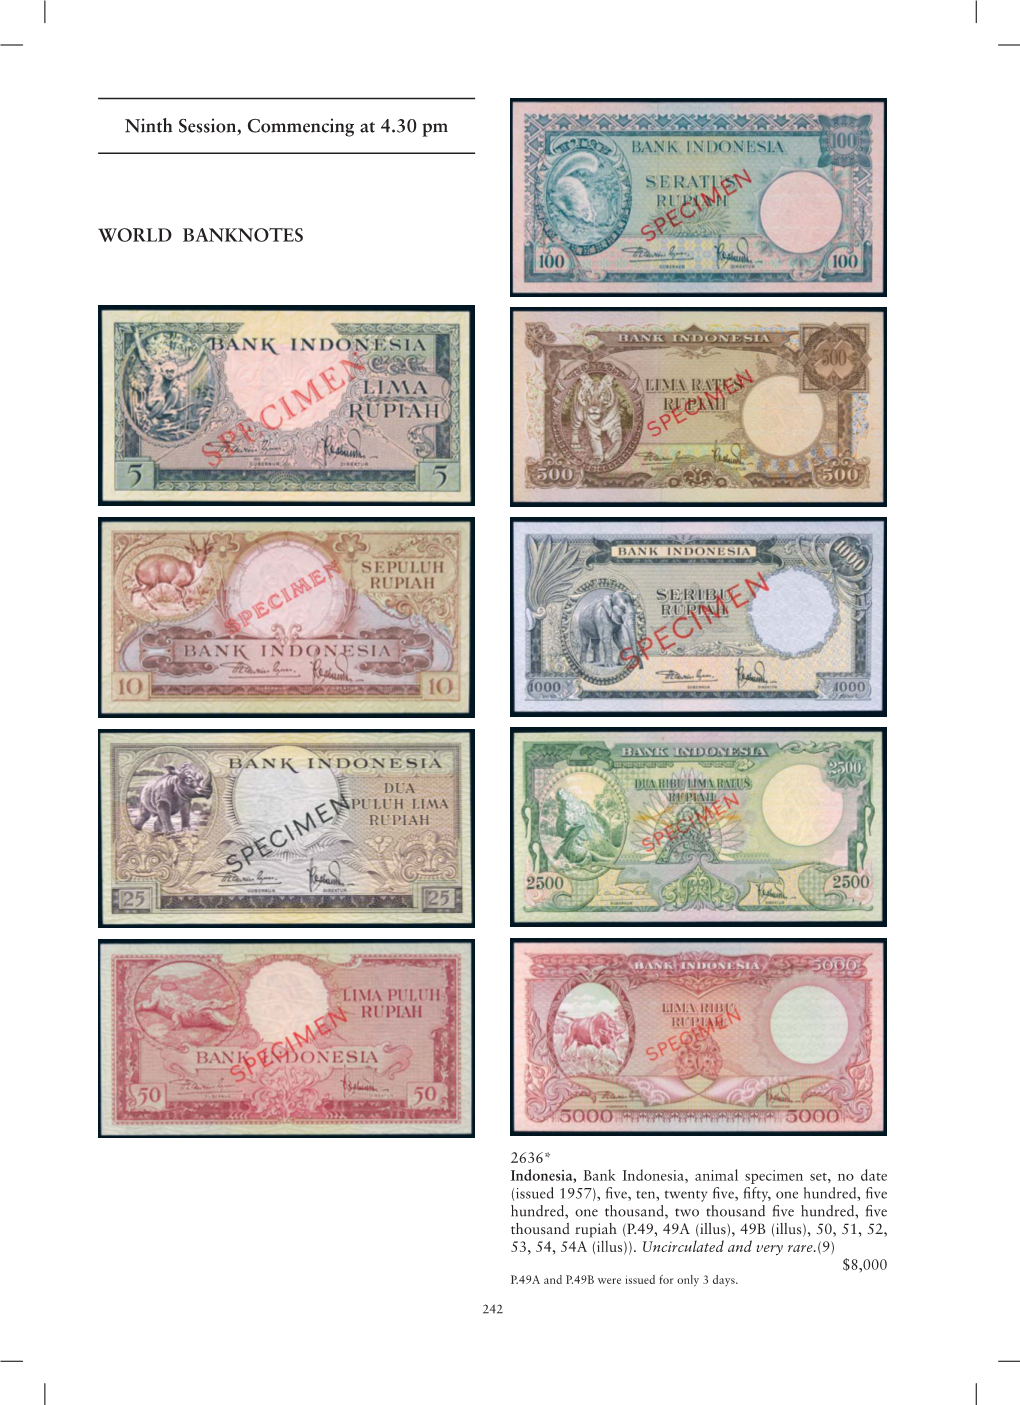 Ninth Session, Commencing at 4.30 Pm WORLD BANKNOTES